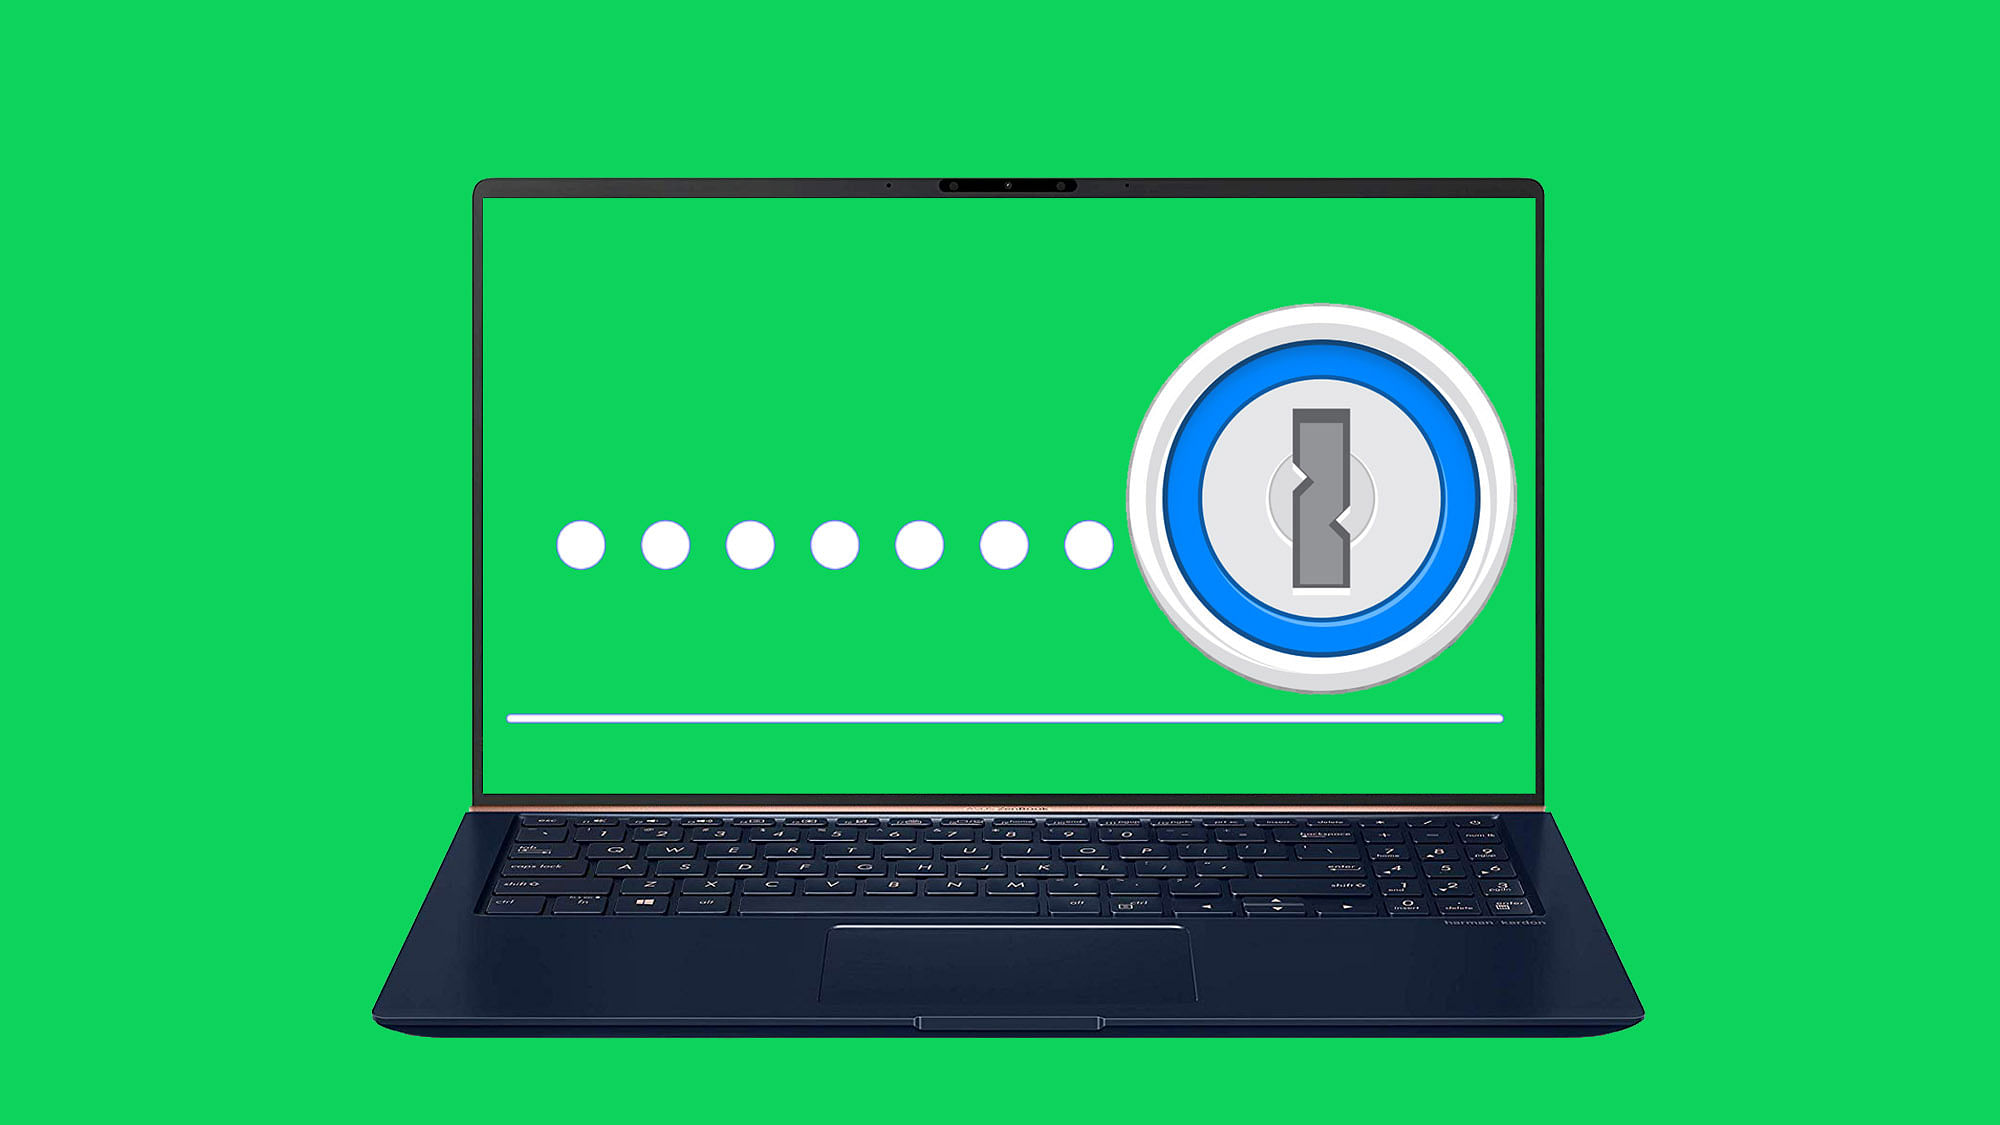 It’s time to become smart with managing passwords.